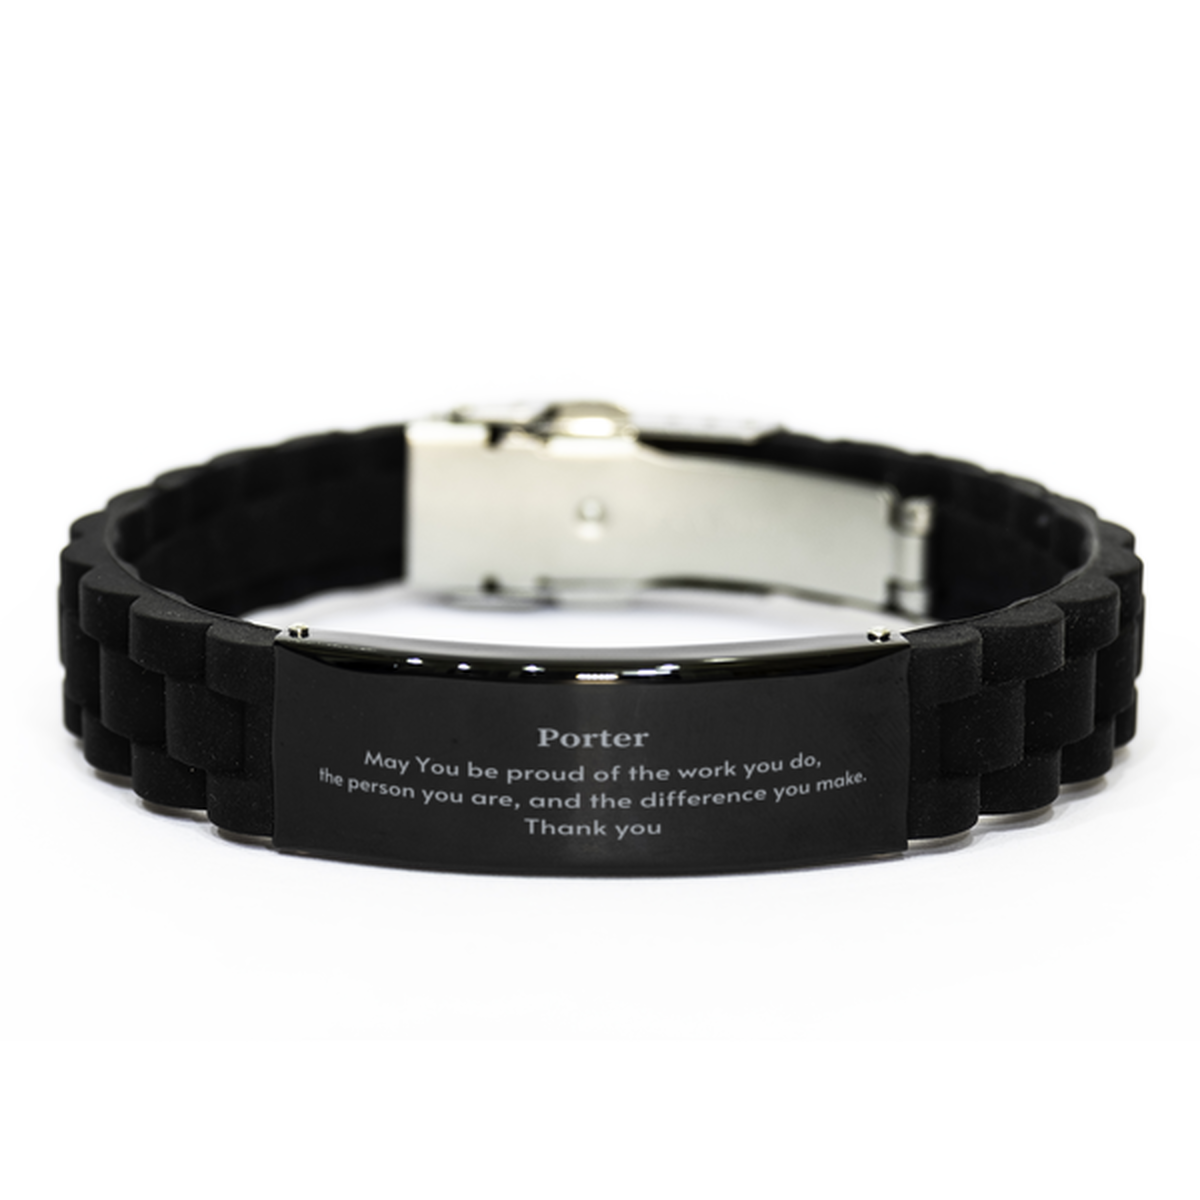 Heartwarming Black Glidelock Clasp Bracelet Retirement Coworkers Gifts for Porter, Porter May You be proud of the work you do, the person you are Gifts for Boss Men Women Friends